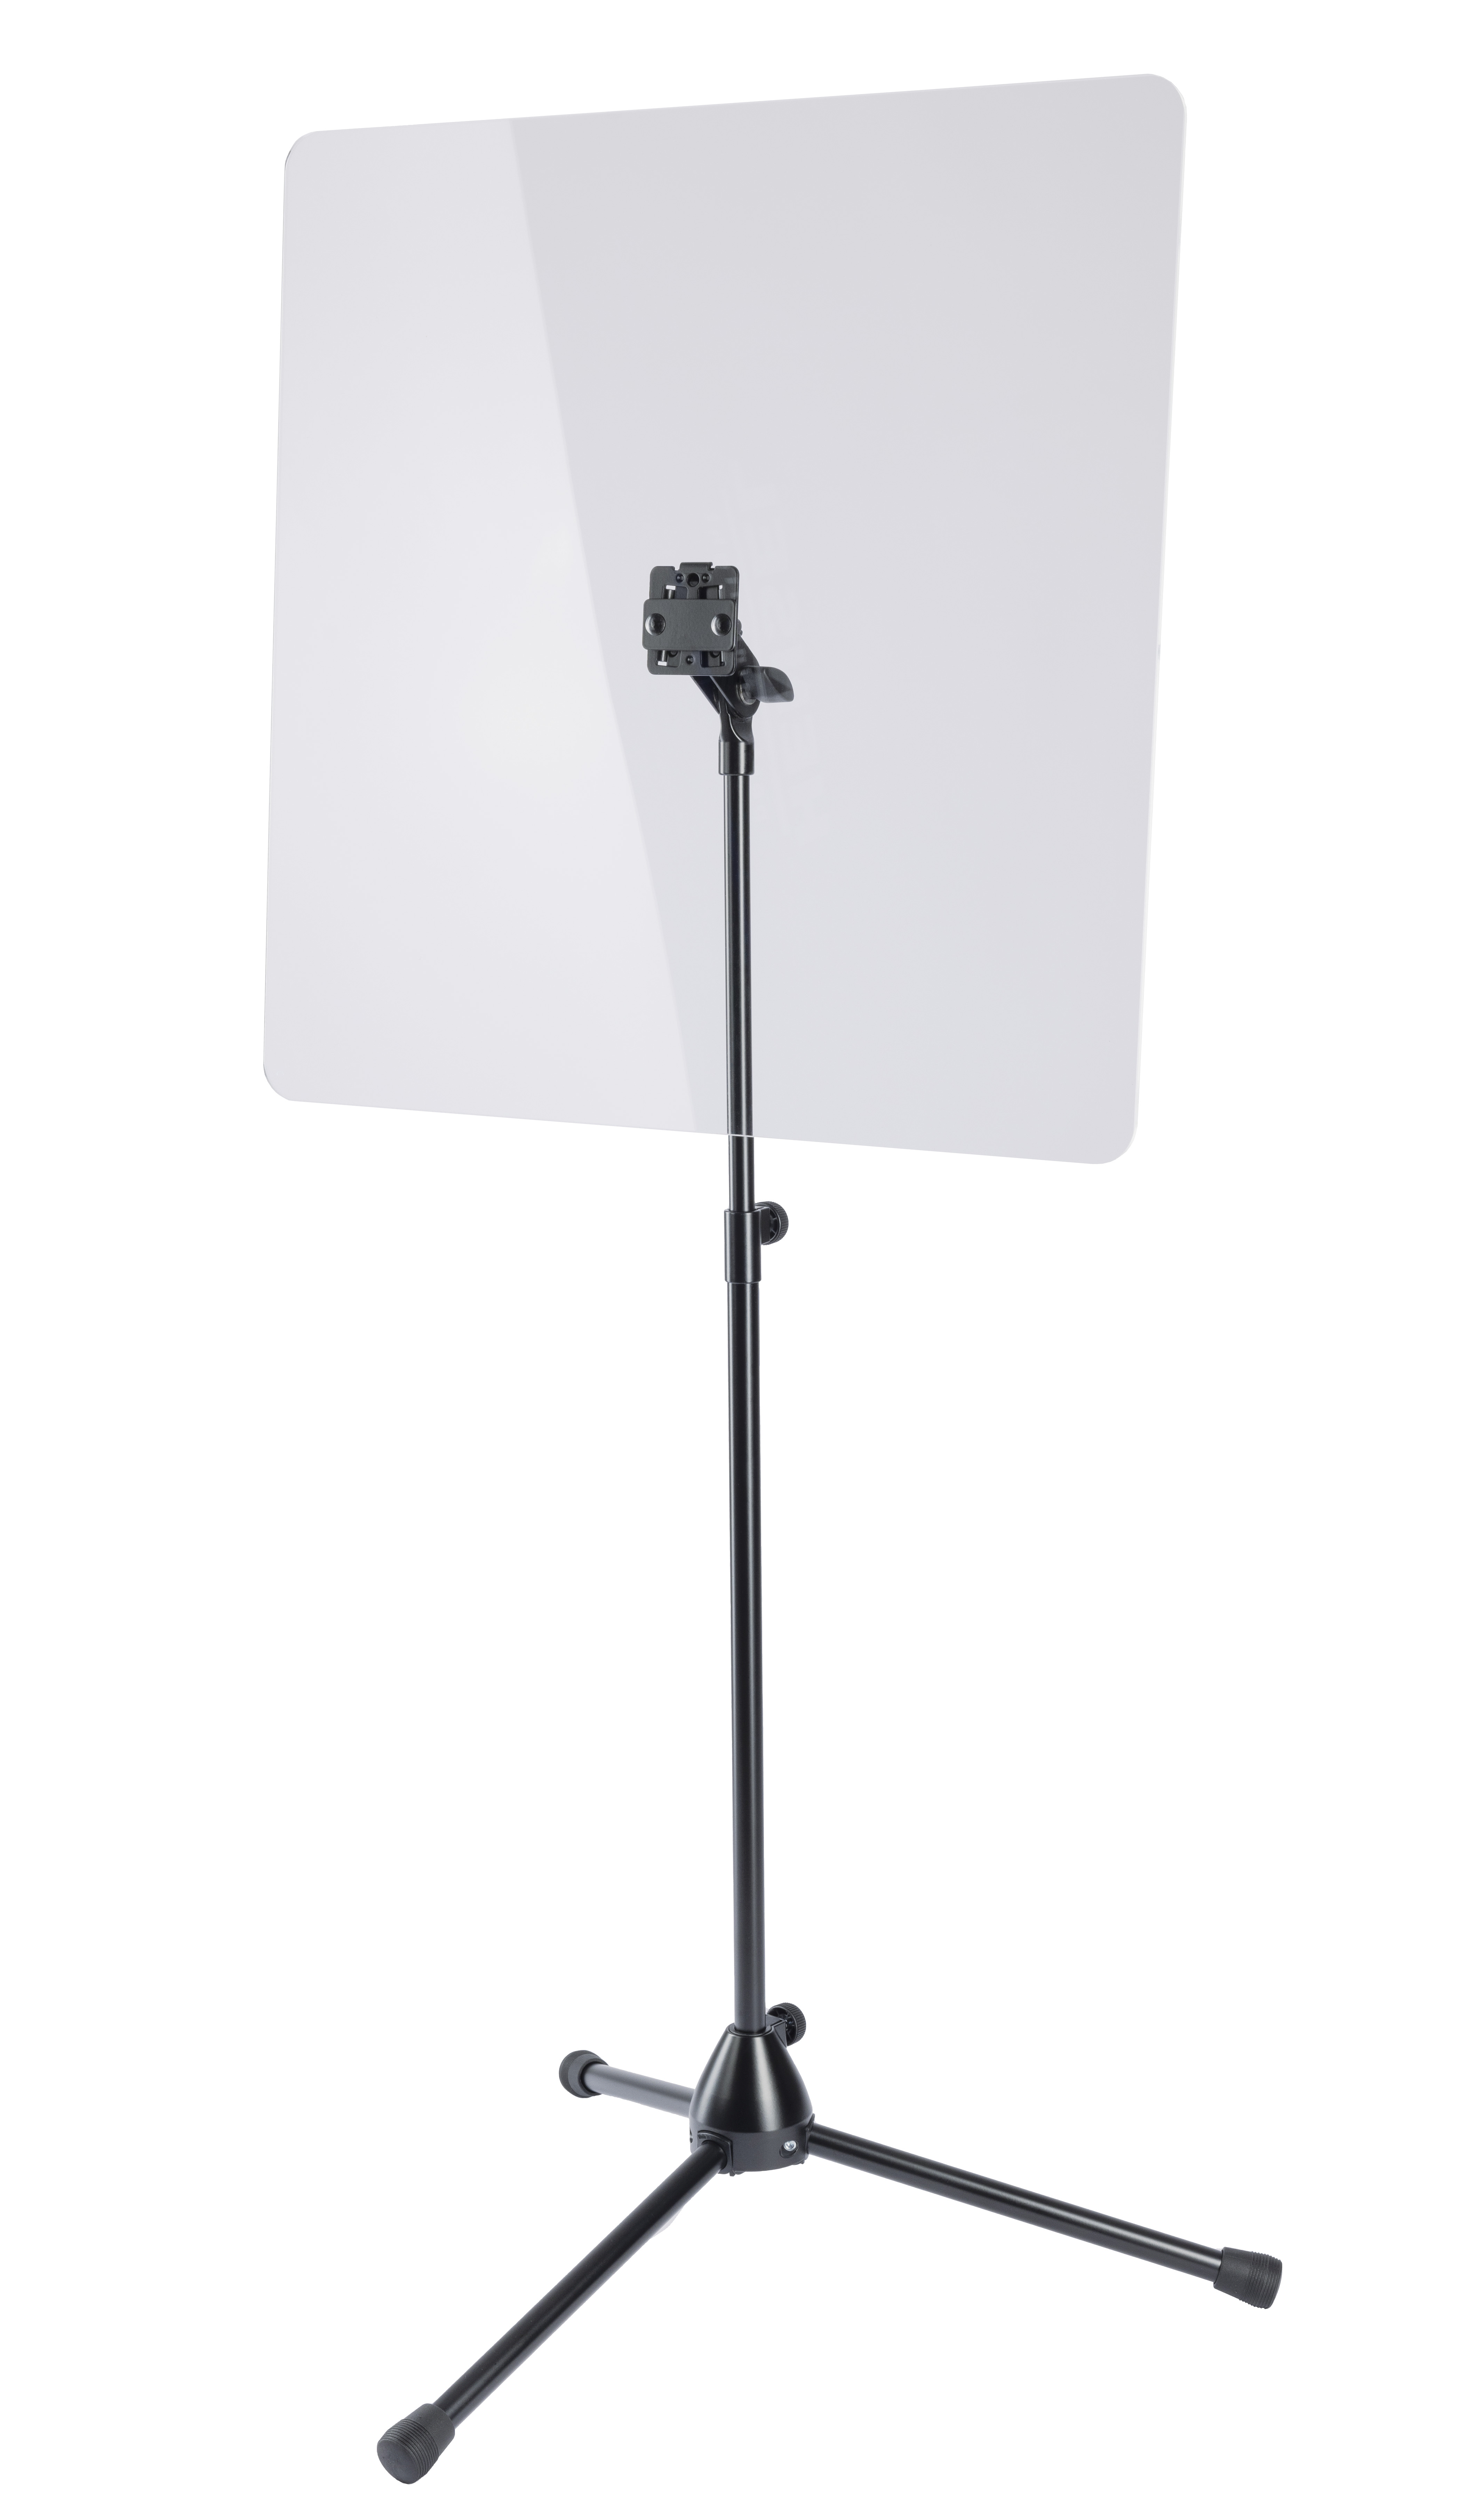 Protective shield with stand